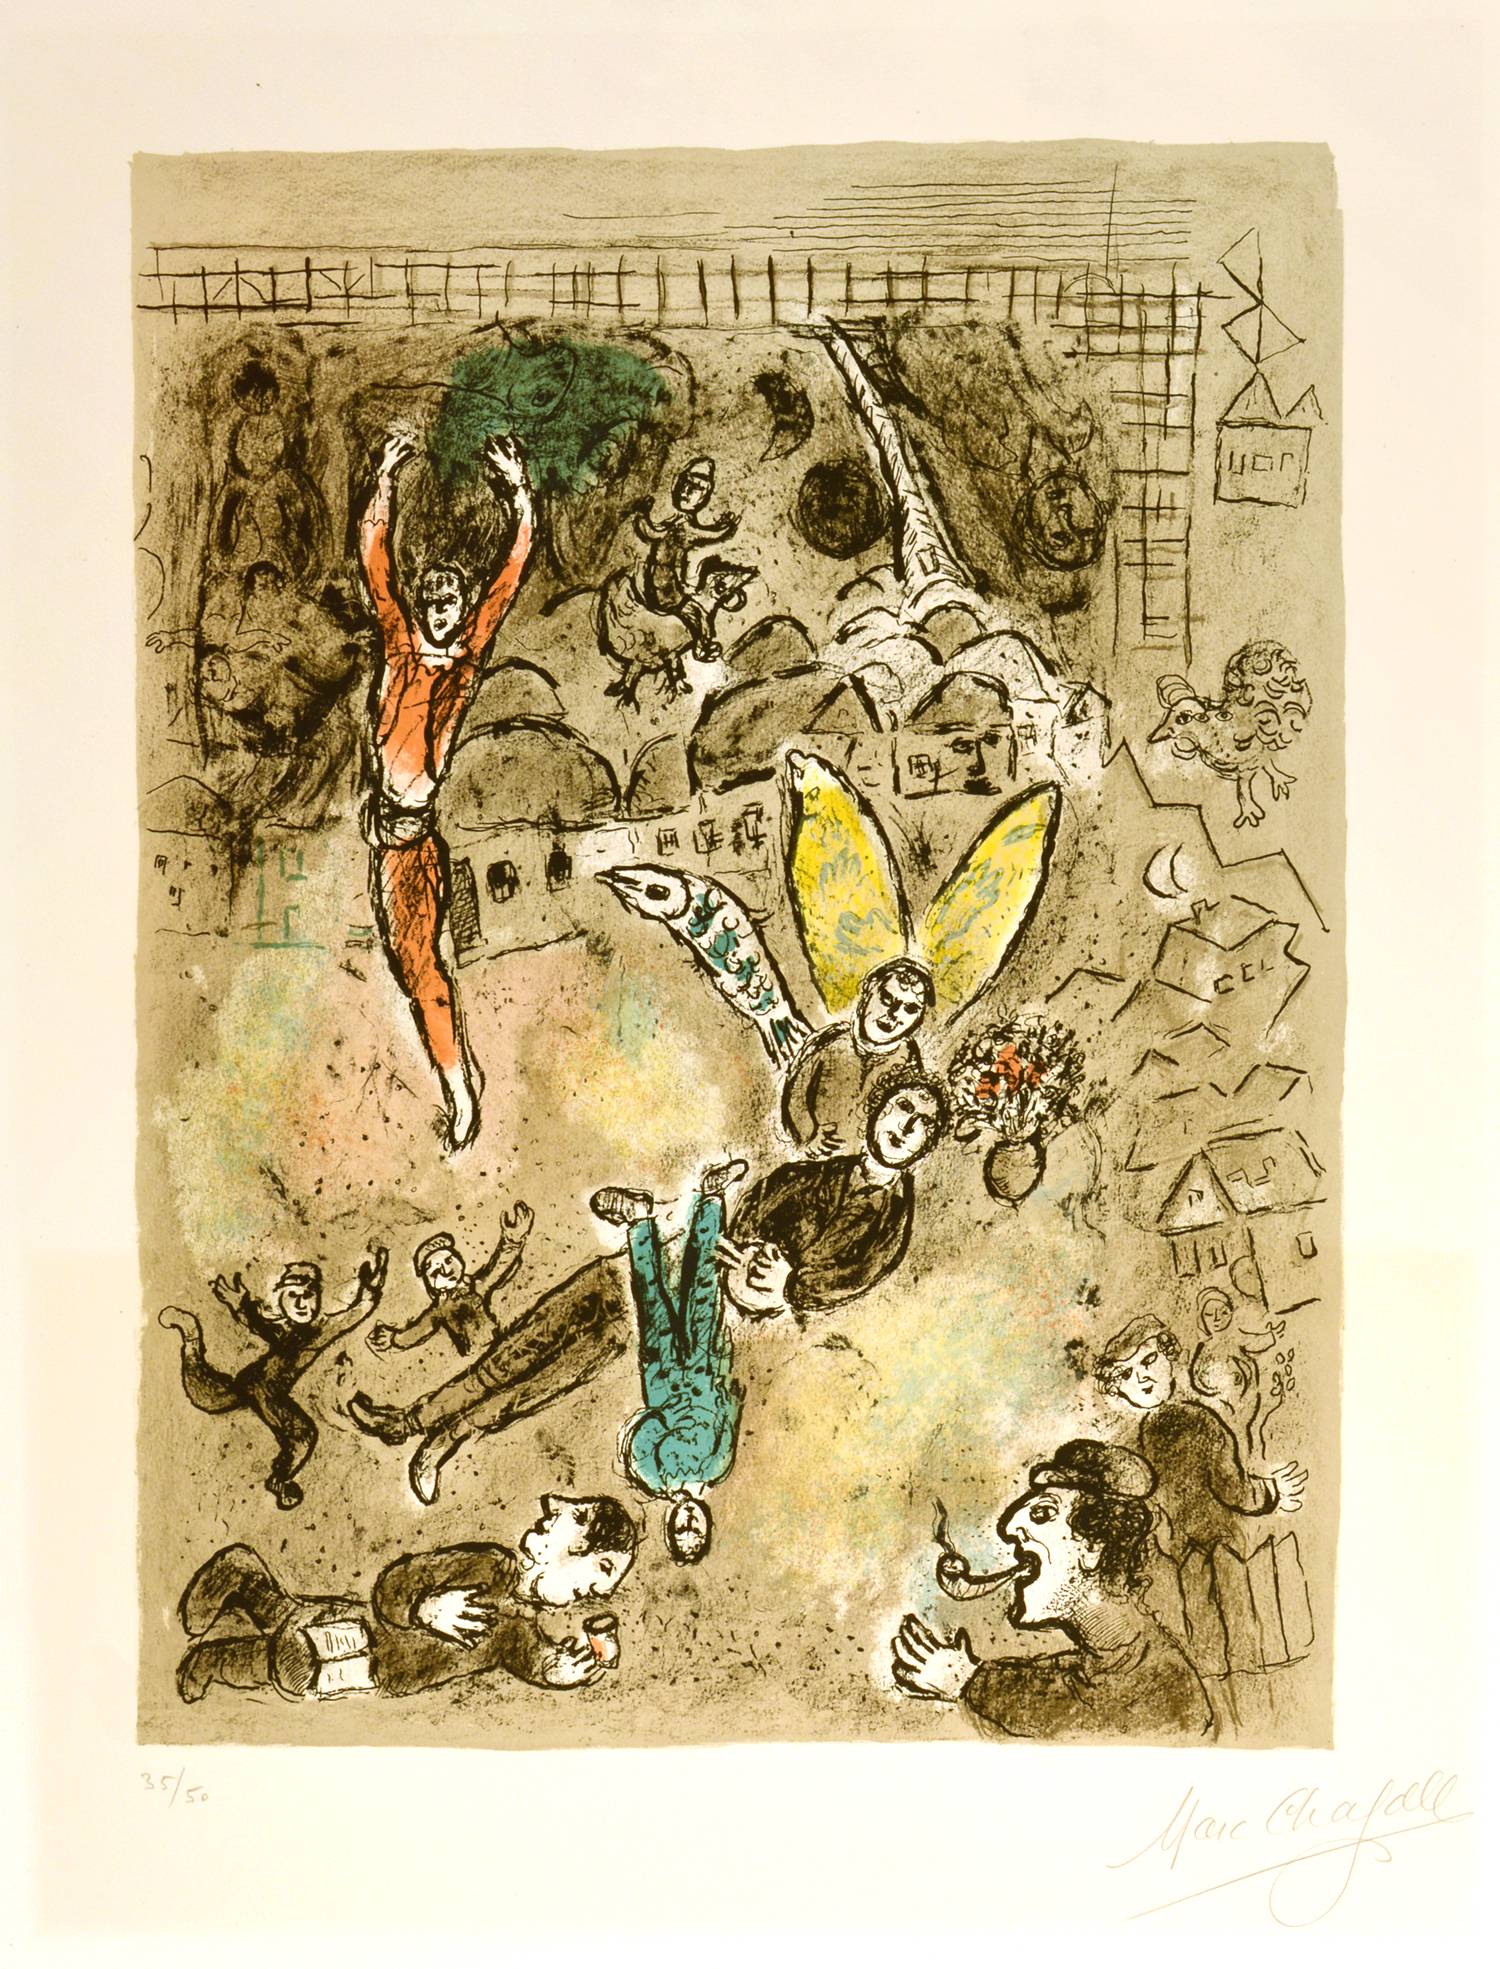 lithograph of many figures dancing, jumping, performing